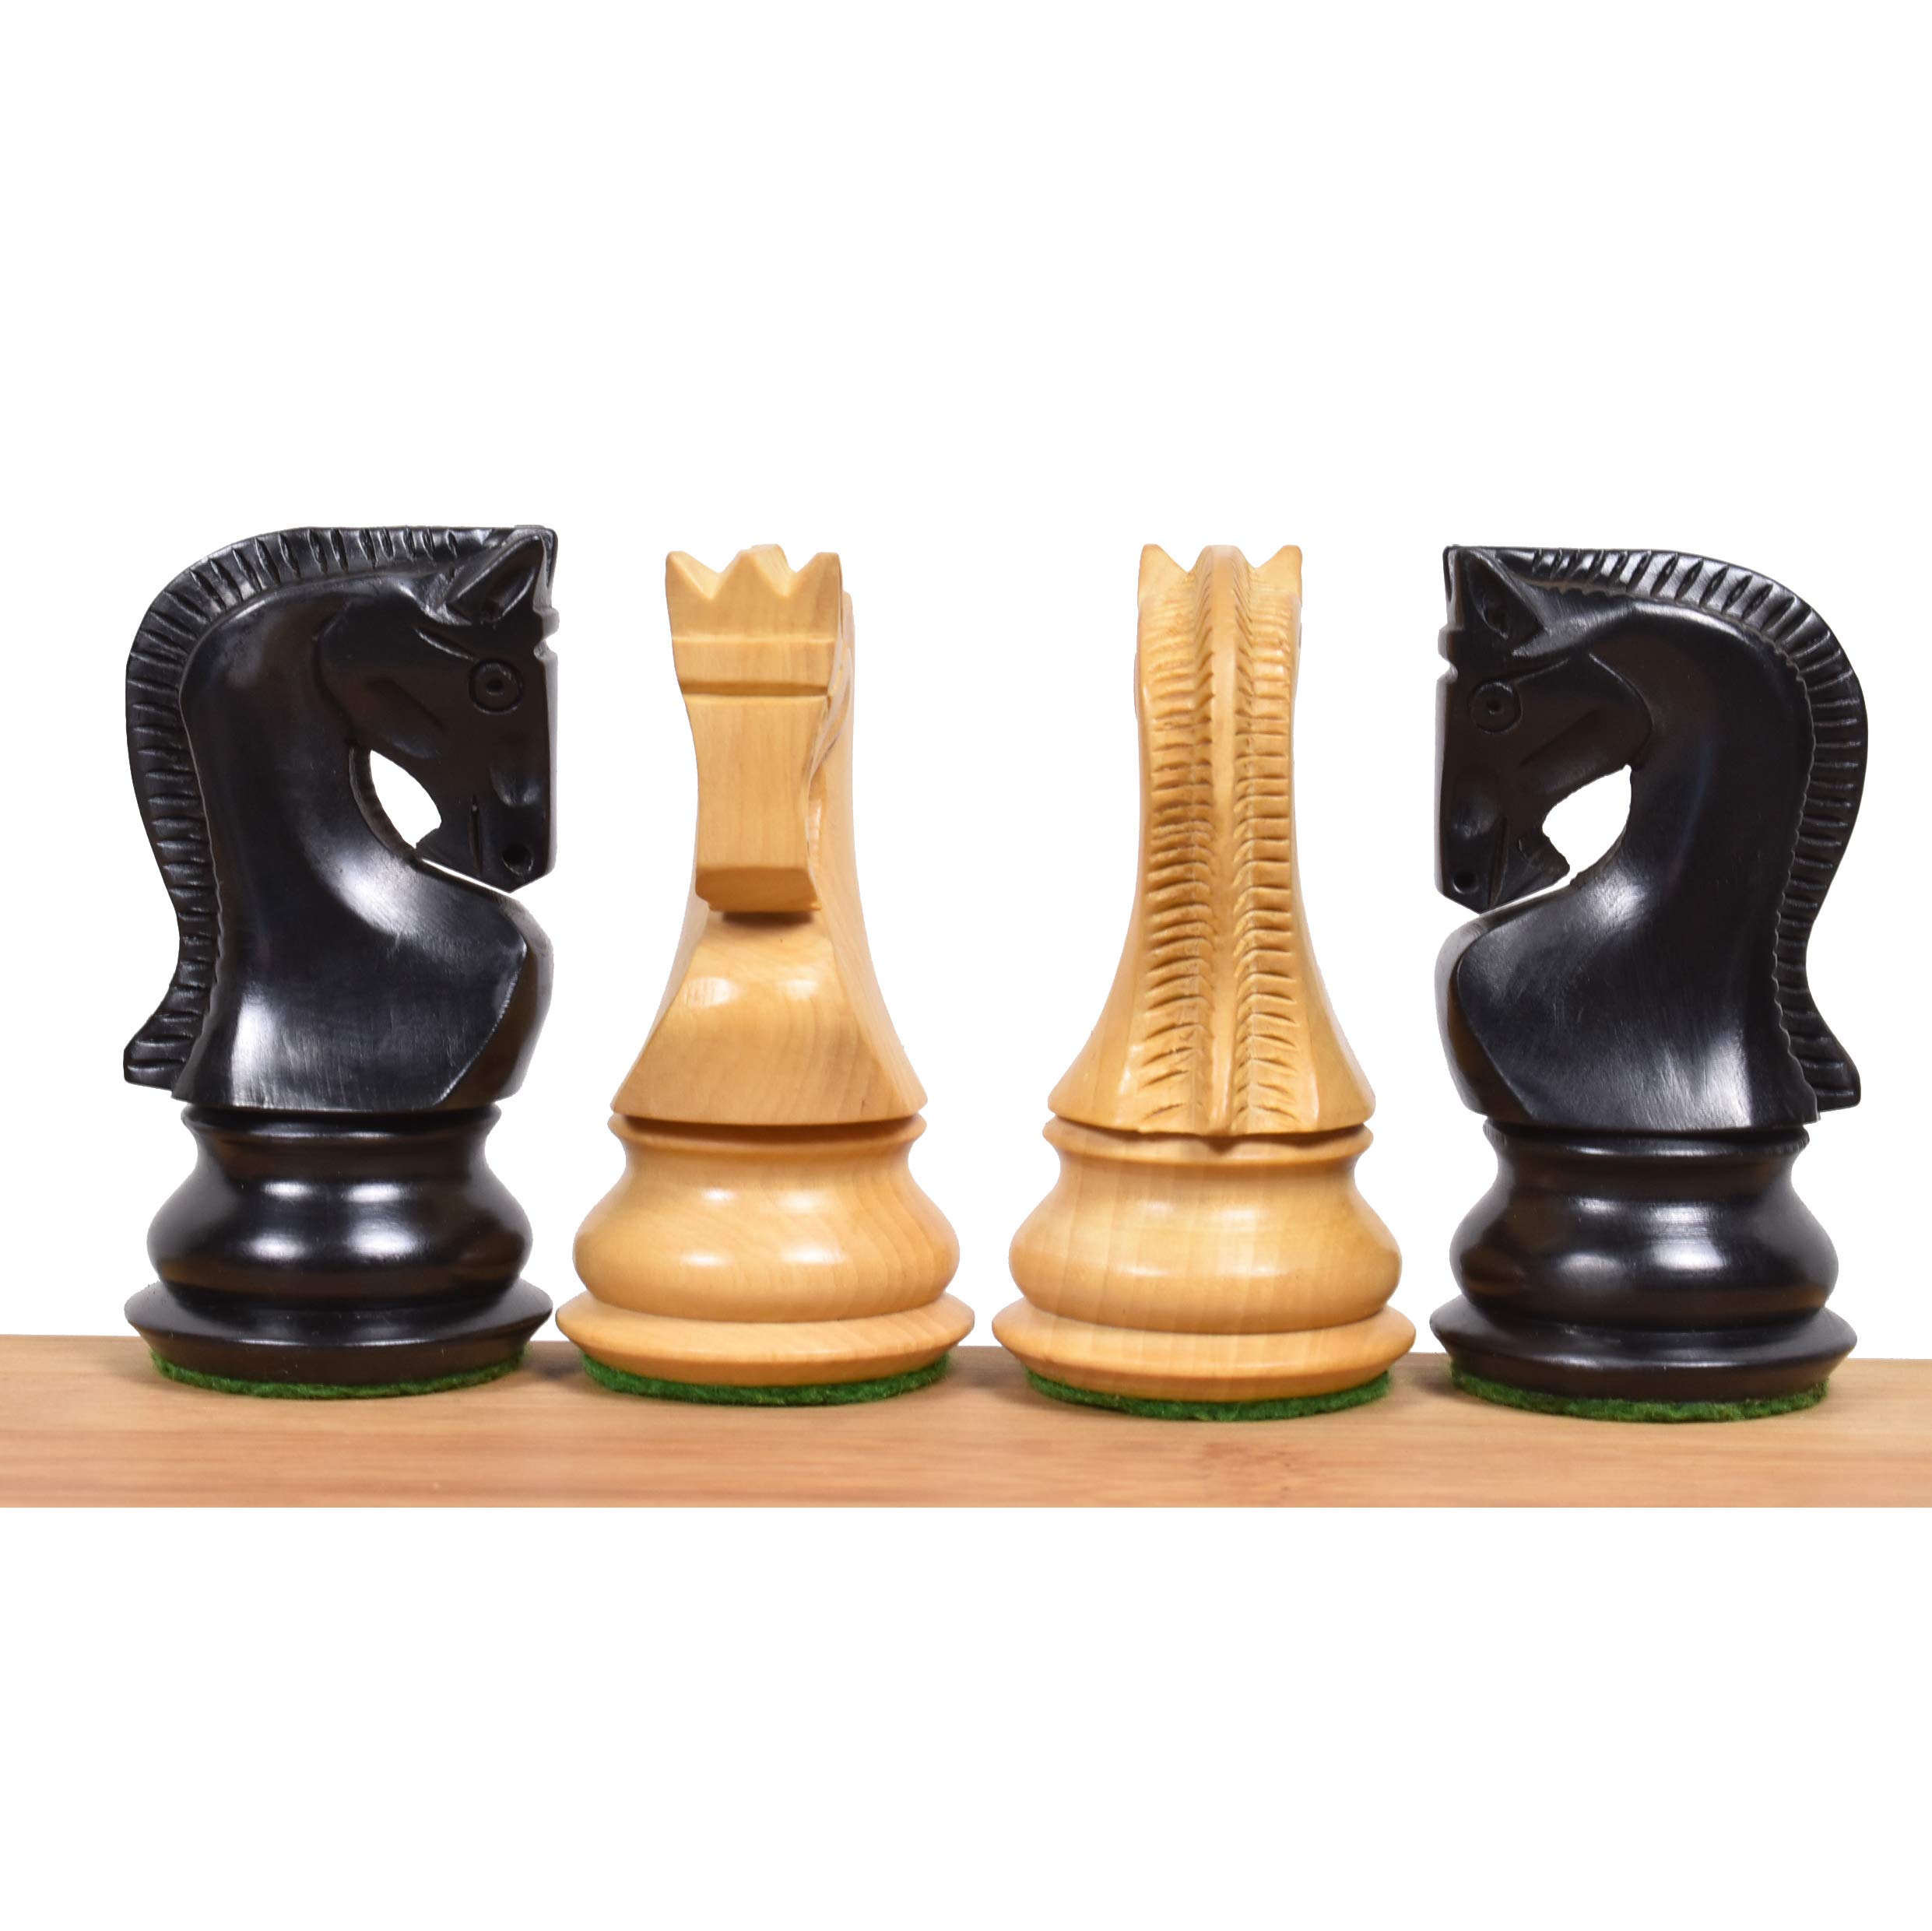 Royal Chess Mall Russian Zagreb Chess Pieces Only Chess Set, Ebonized Boxwood Wooden Chess Set, 3.9-in King, Weighted Chess Pieces for Chess Game (2.3 lbs)